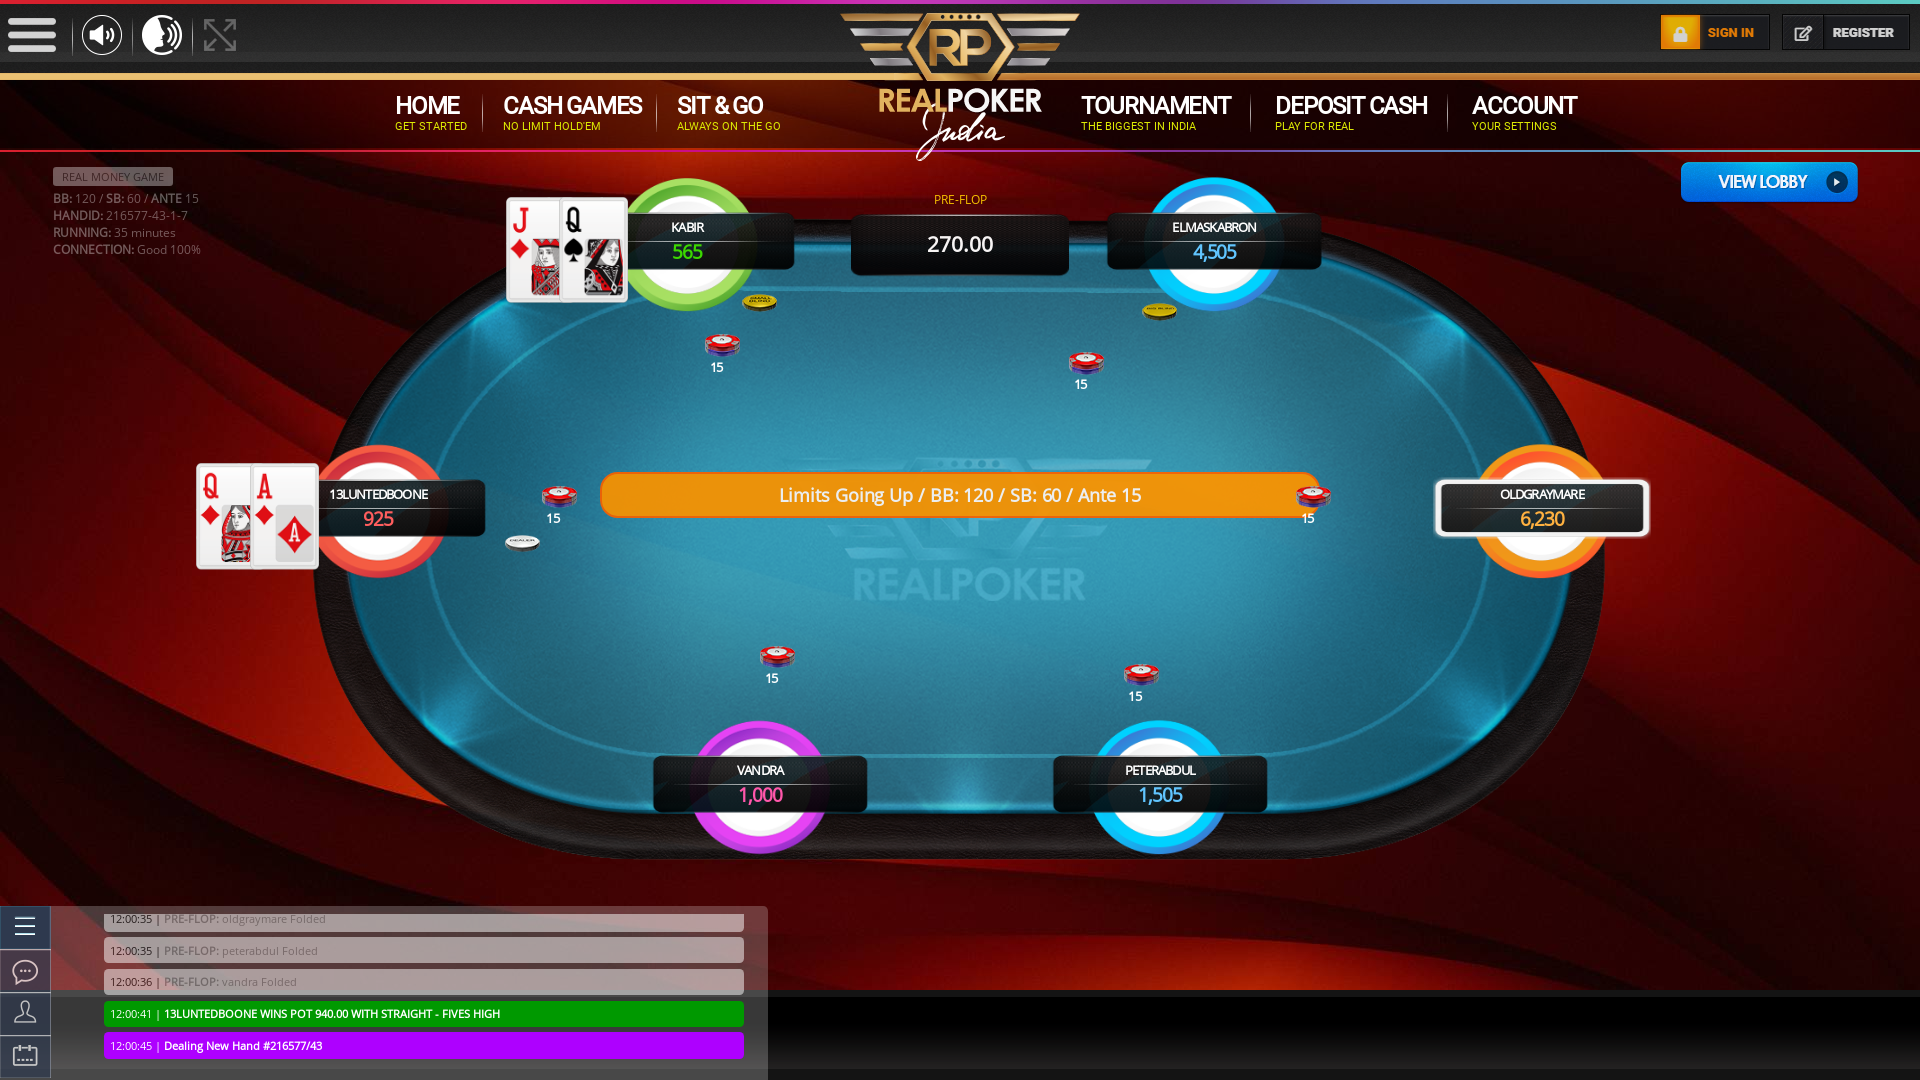 Indian online poker on a 10 player table in the 34th minute match up